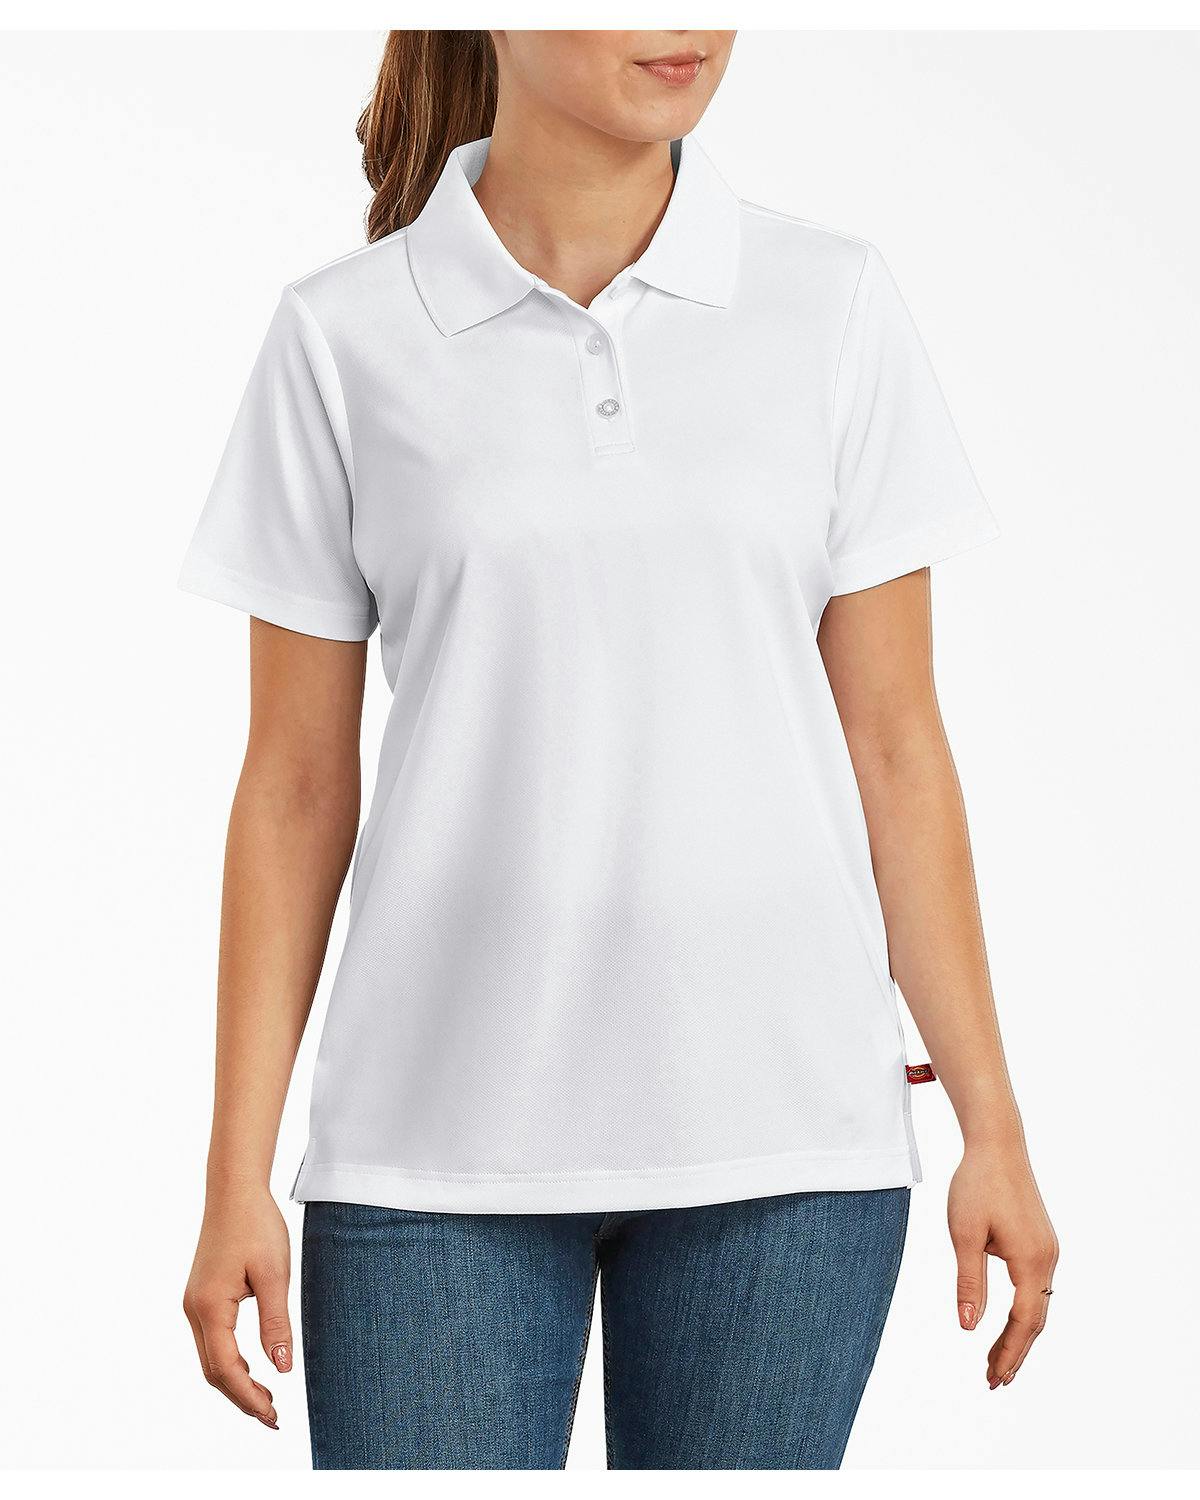 Image for Ladies' Performance Polo